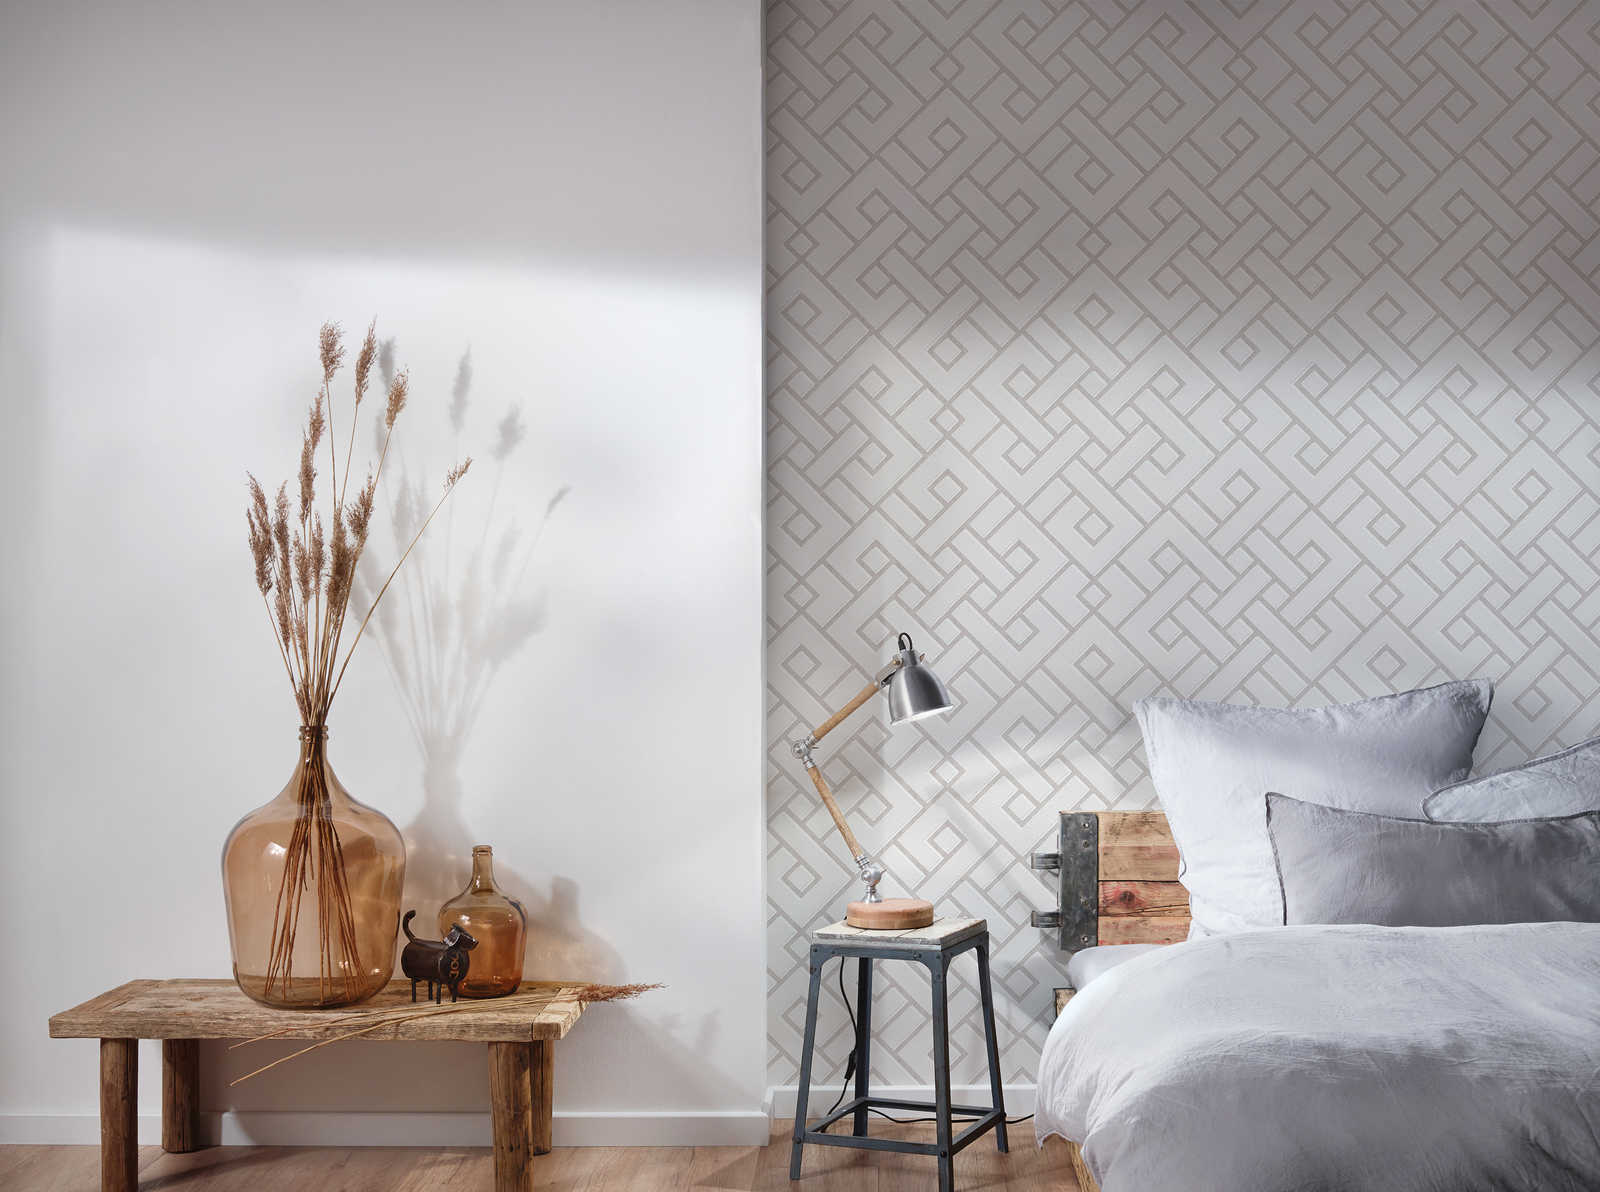             Non-woven wallpaper graphic design with 3D effect by MICHALSKY - cream, white
        